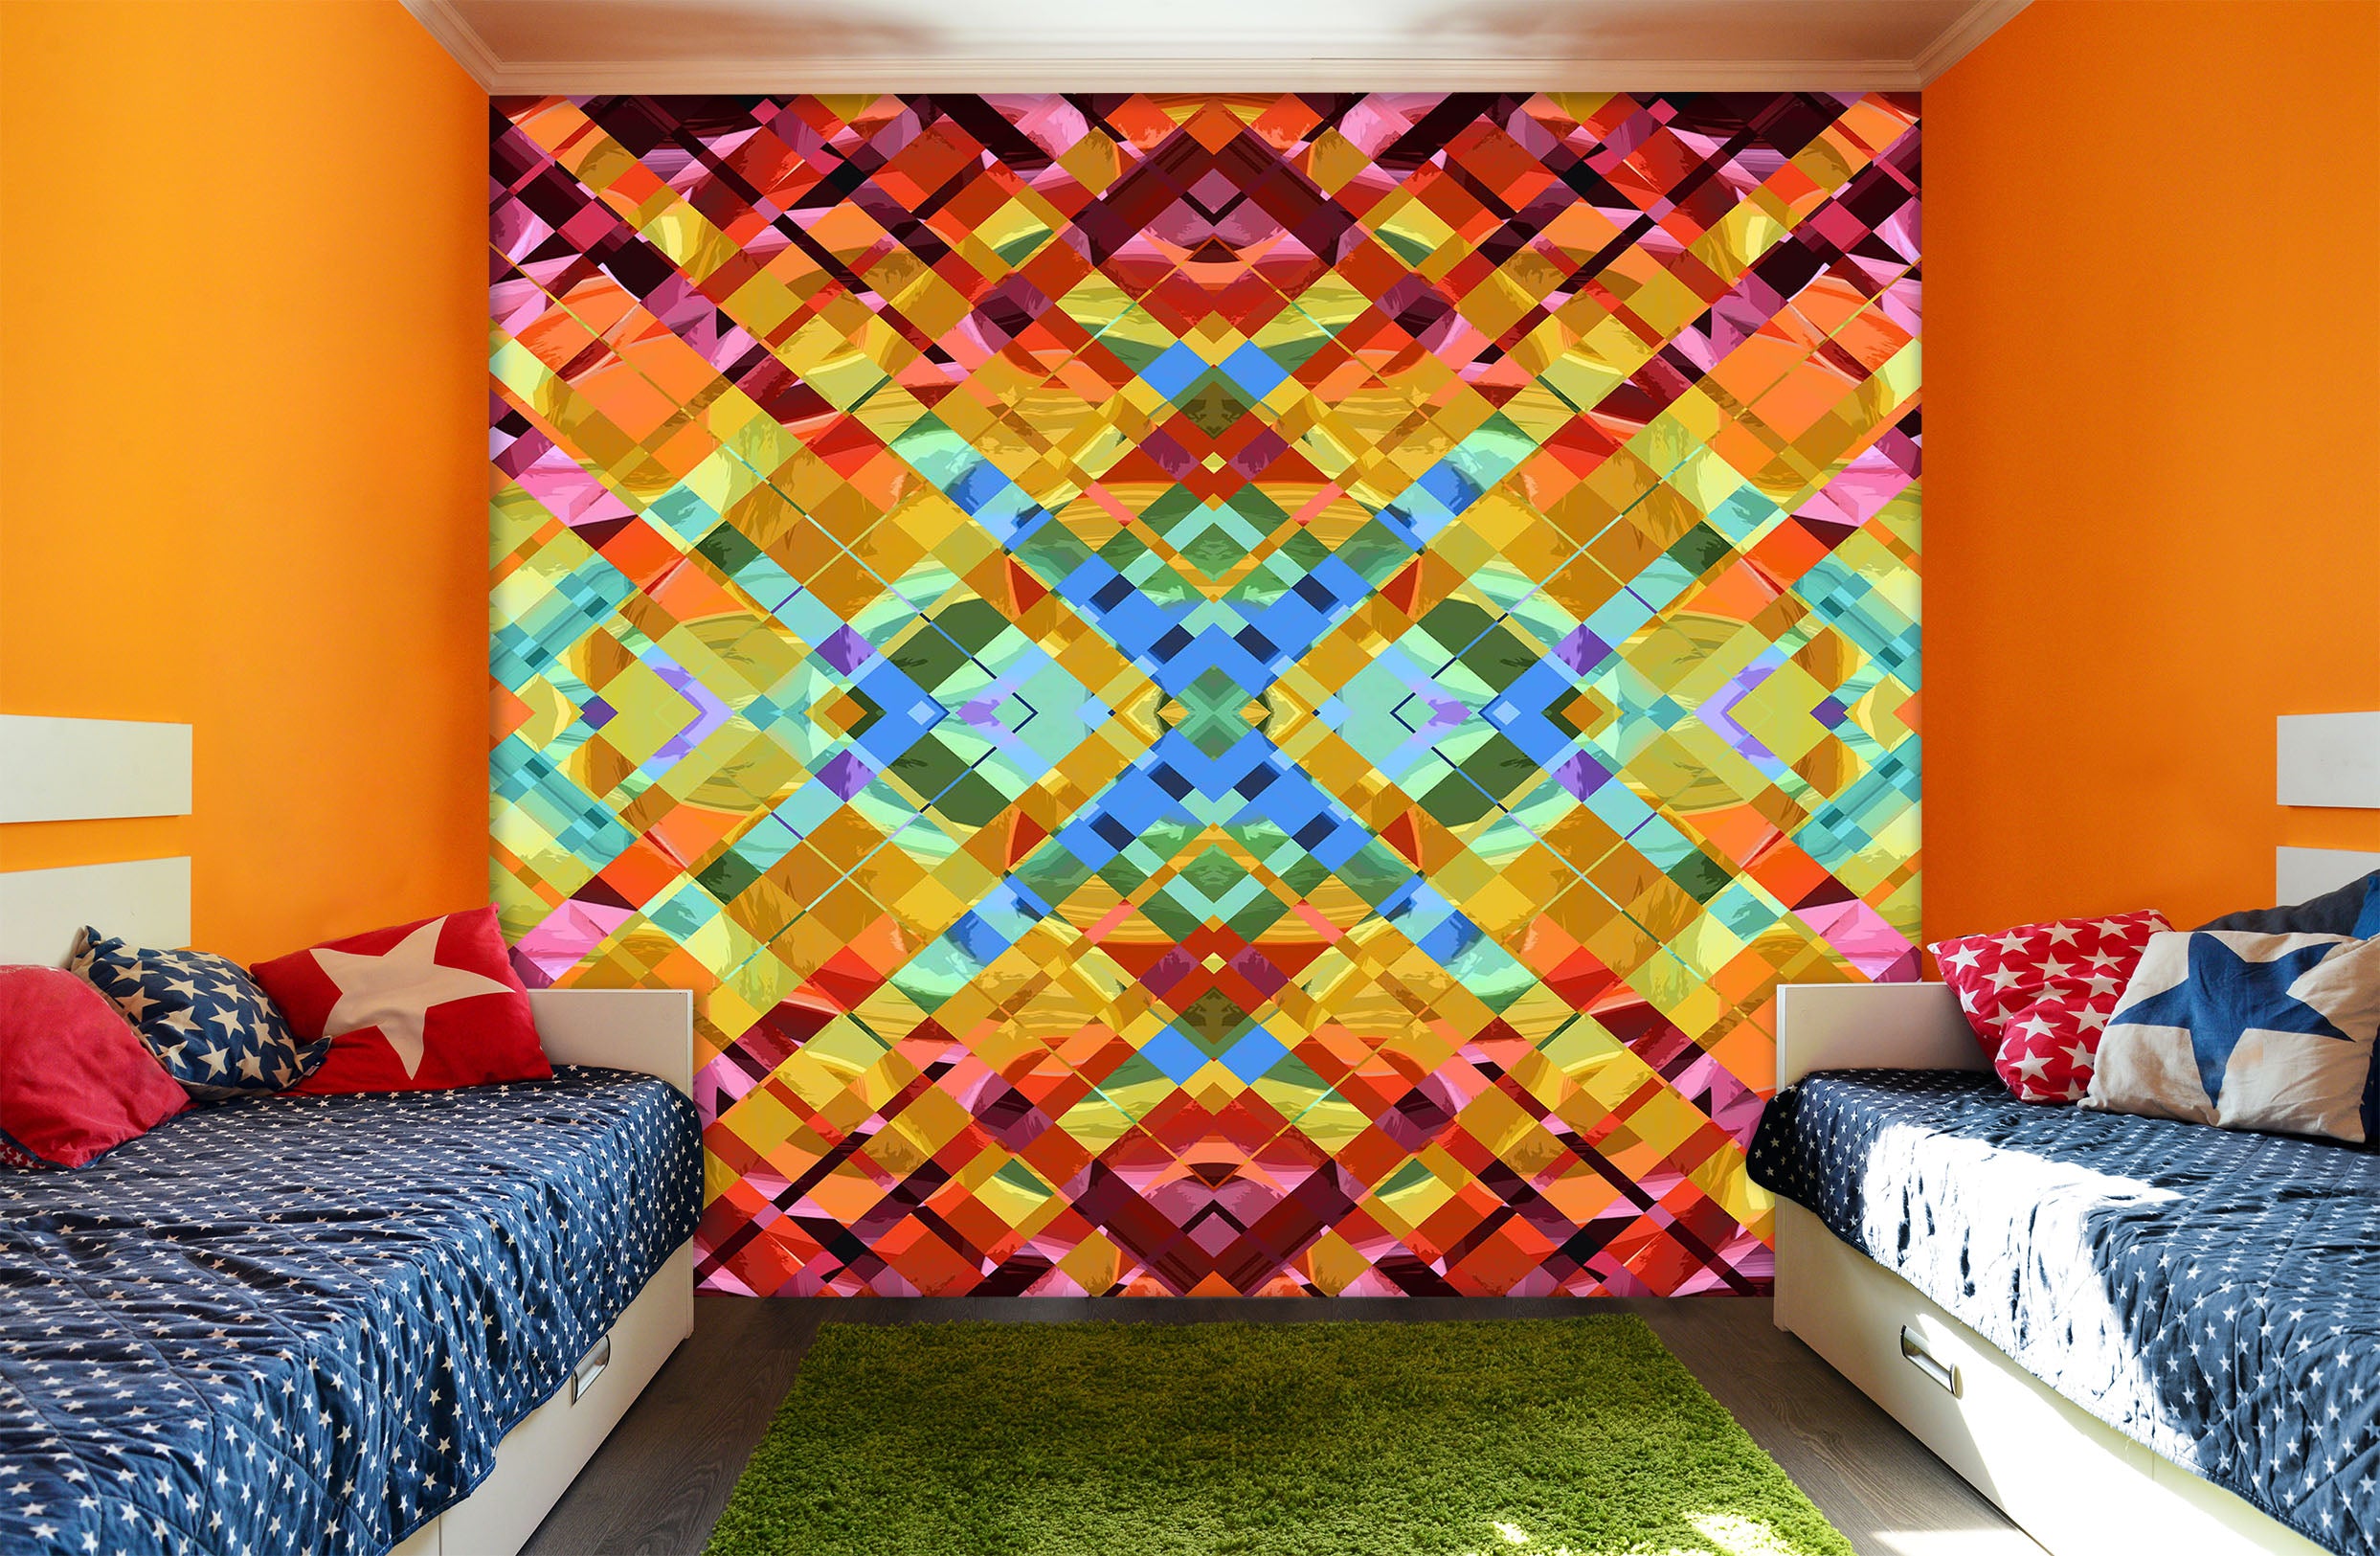 3D Color Weave 1401 Shandra Smith Wall Mural Wall Murals